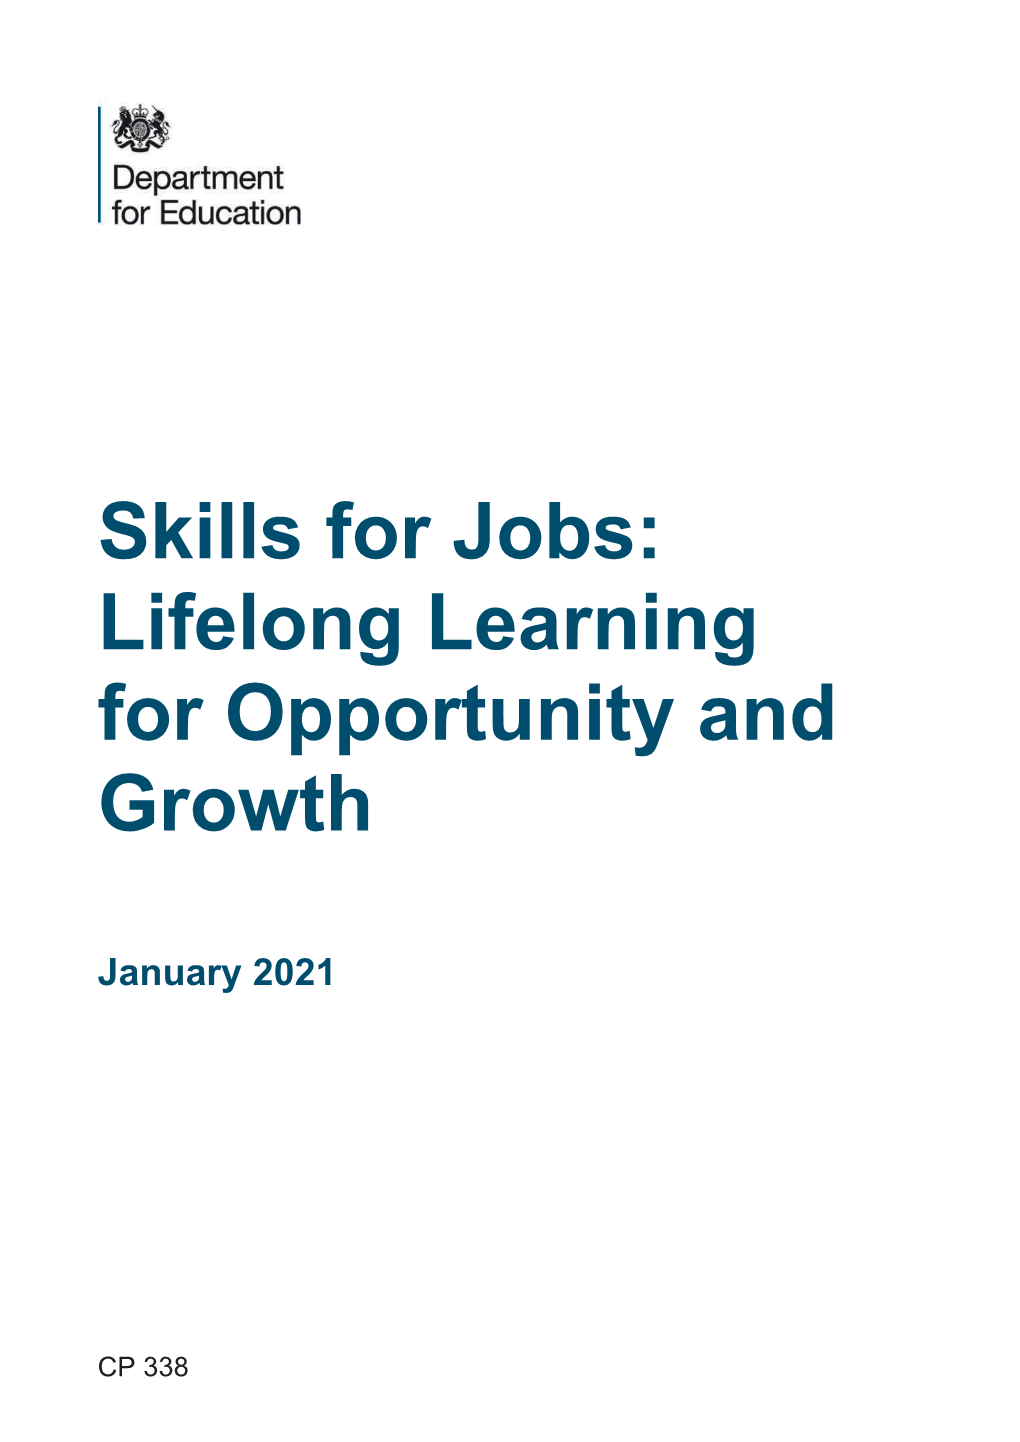 Skills for Jobs: Lifelong Learning for Opportunity and Growth